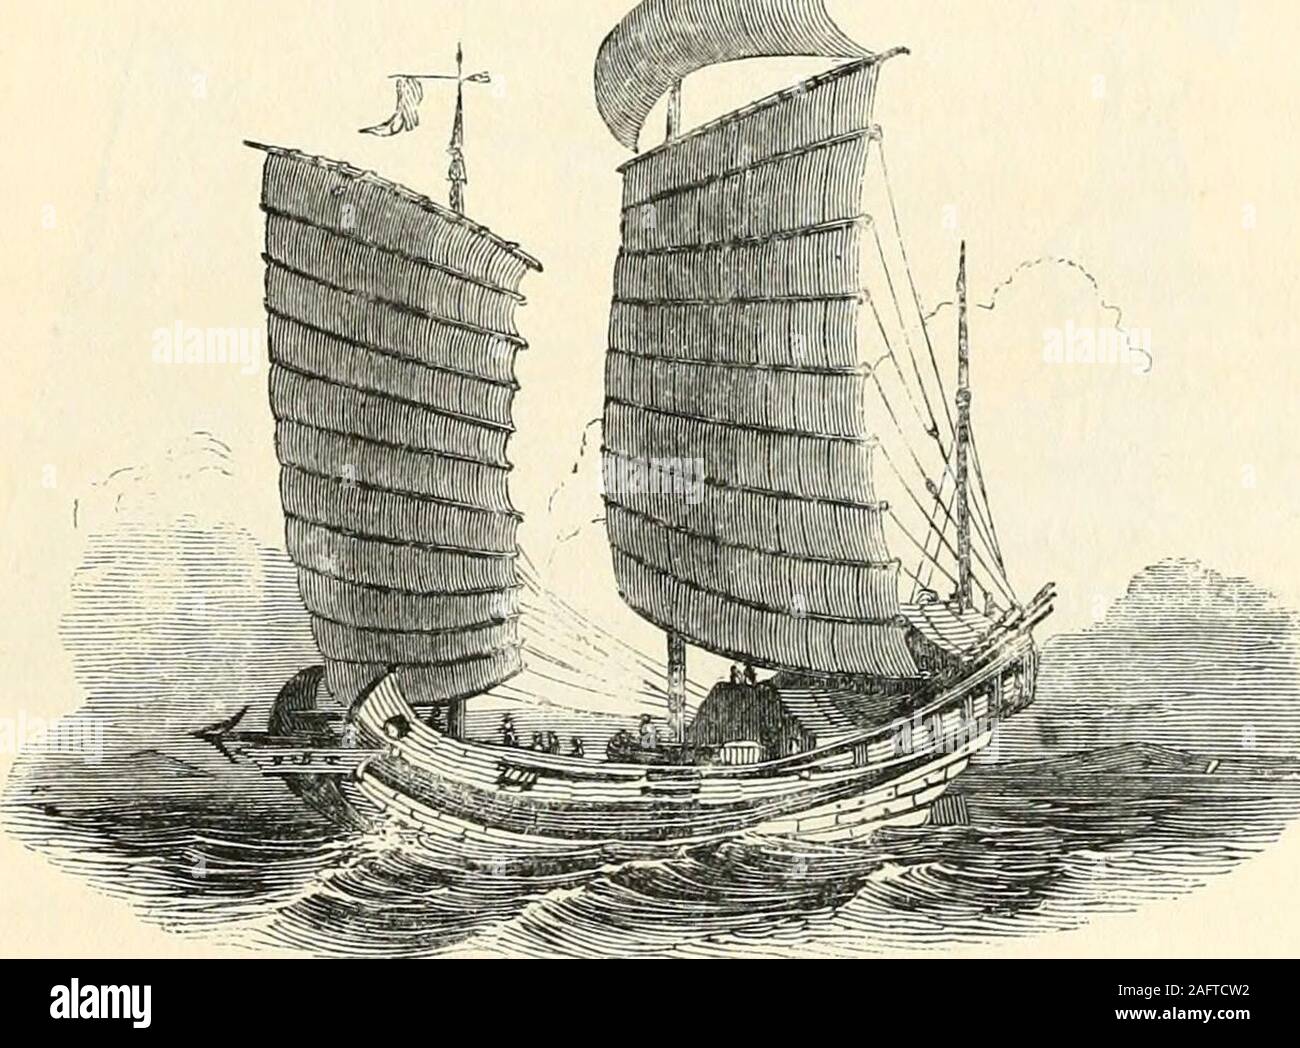 . Narrative of a voyage round the world : performed in Her Majesty's ship Sulphur, during the years 1836-1842, including details of the naval operations in China, from Dec. 1840, to Nov. 1841 ; published under the authority of the lords commissioners of the Admiralty. TRADING JUNK. Abaft the mainmast, however, in those intendedfor war vessels is an arched cabin, the roof of whichrises about four feet above the deck, and its deck* Chinese Rep. 1841.] SALT-JUNKS. 237 is about tlie same depth below the upper deck. Noofuns are mounted abaft the mainmast. They oe-cupy the space between the fore and Stock Photo